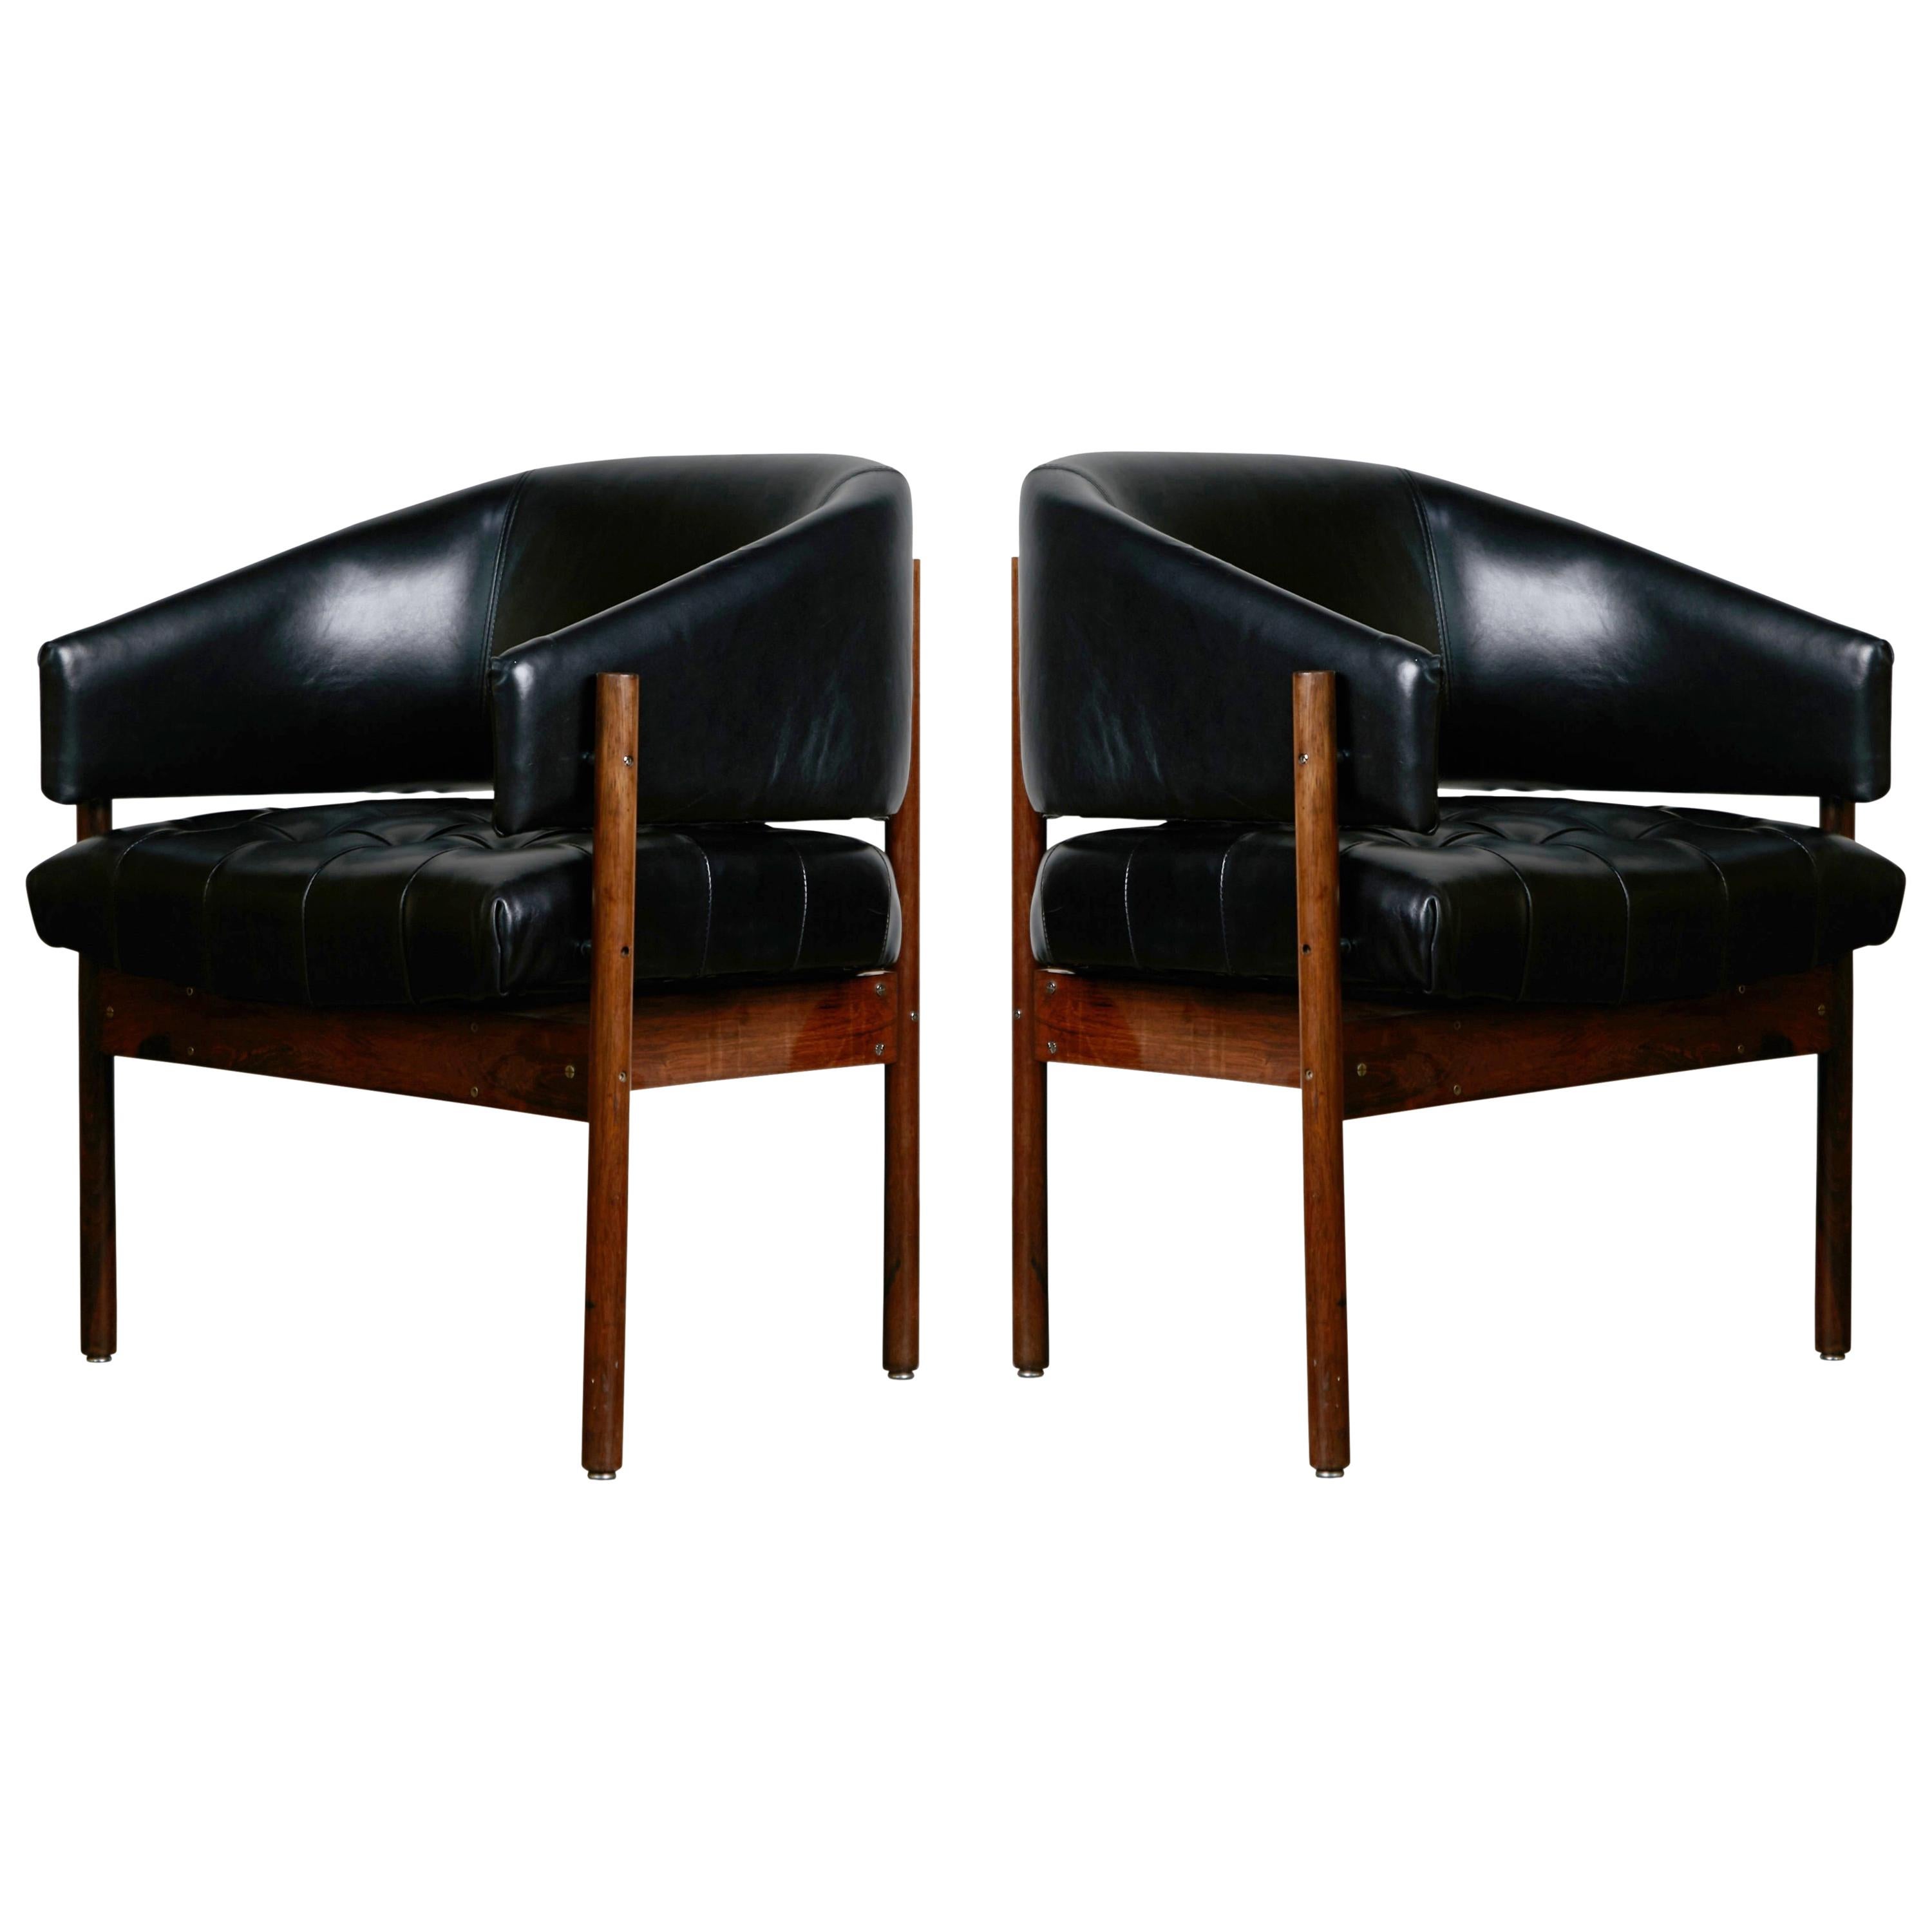 Jorge Zalszupin 'Senior' Rosewood & Leather Armchairs, Produced in 1972, Brazil